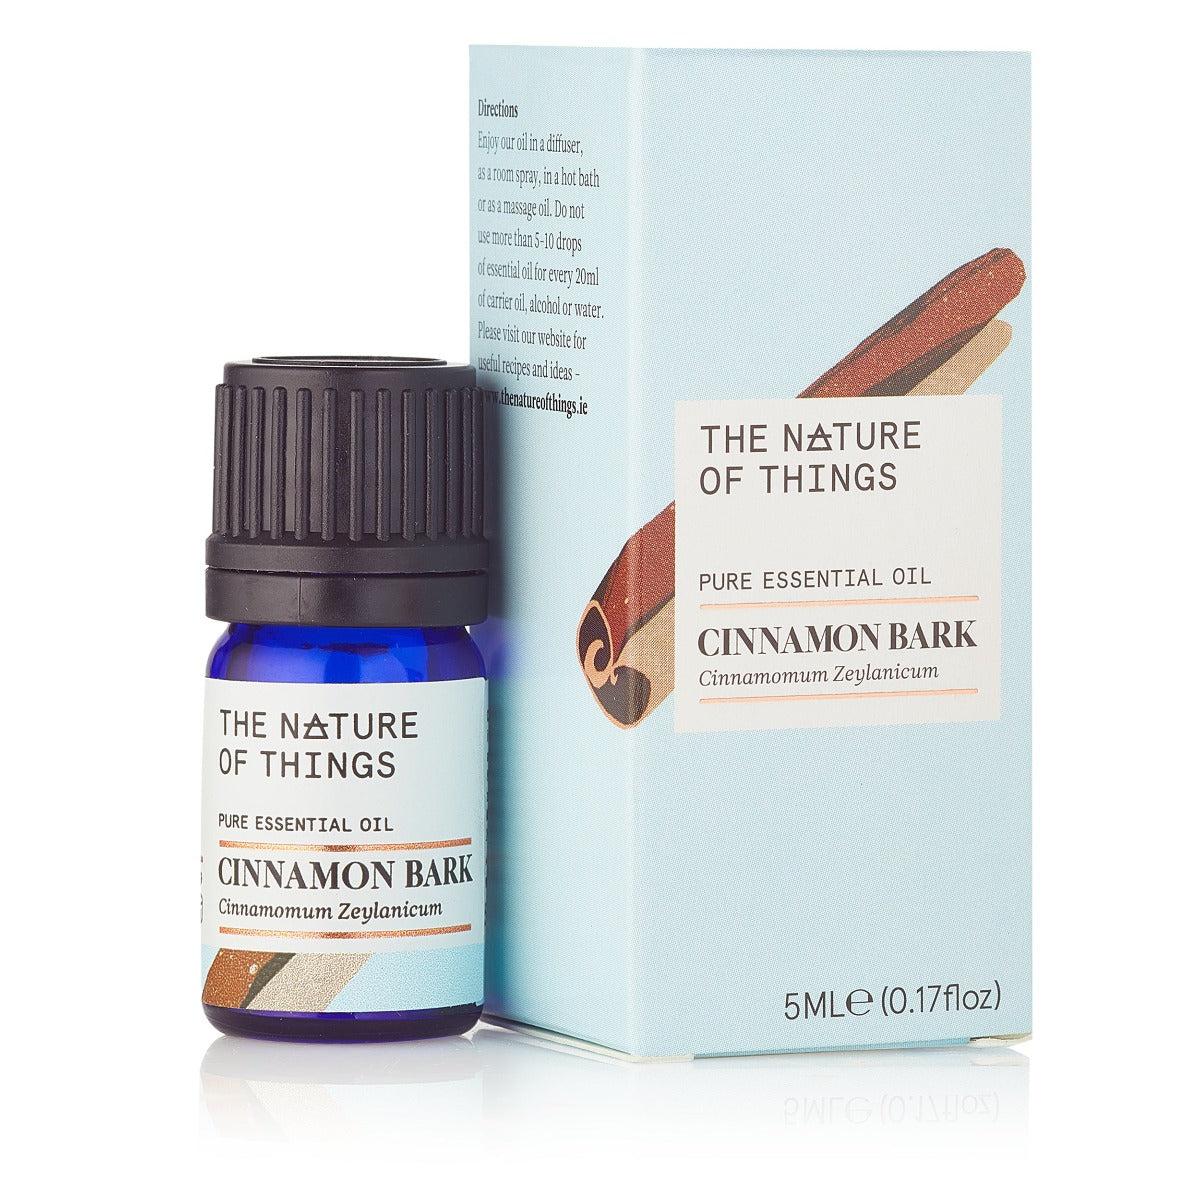 Cinnamon Bark Essential Oil from The Nature of Things